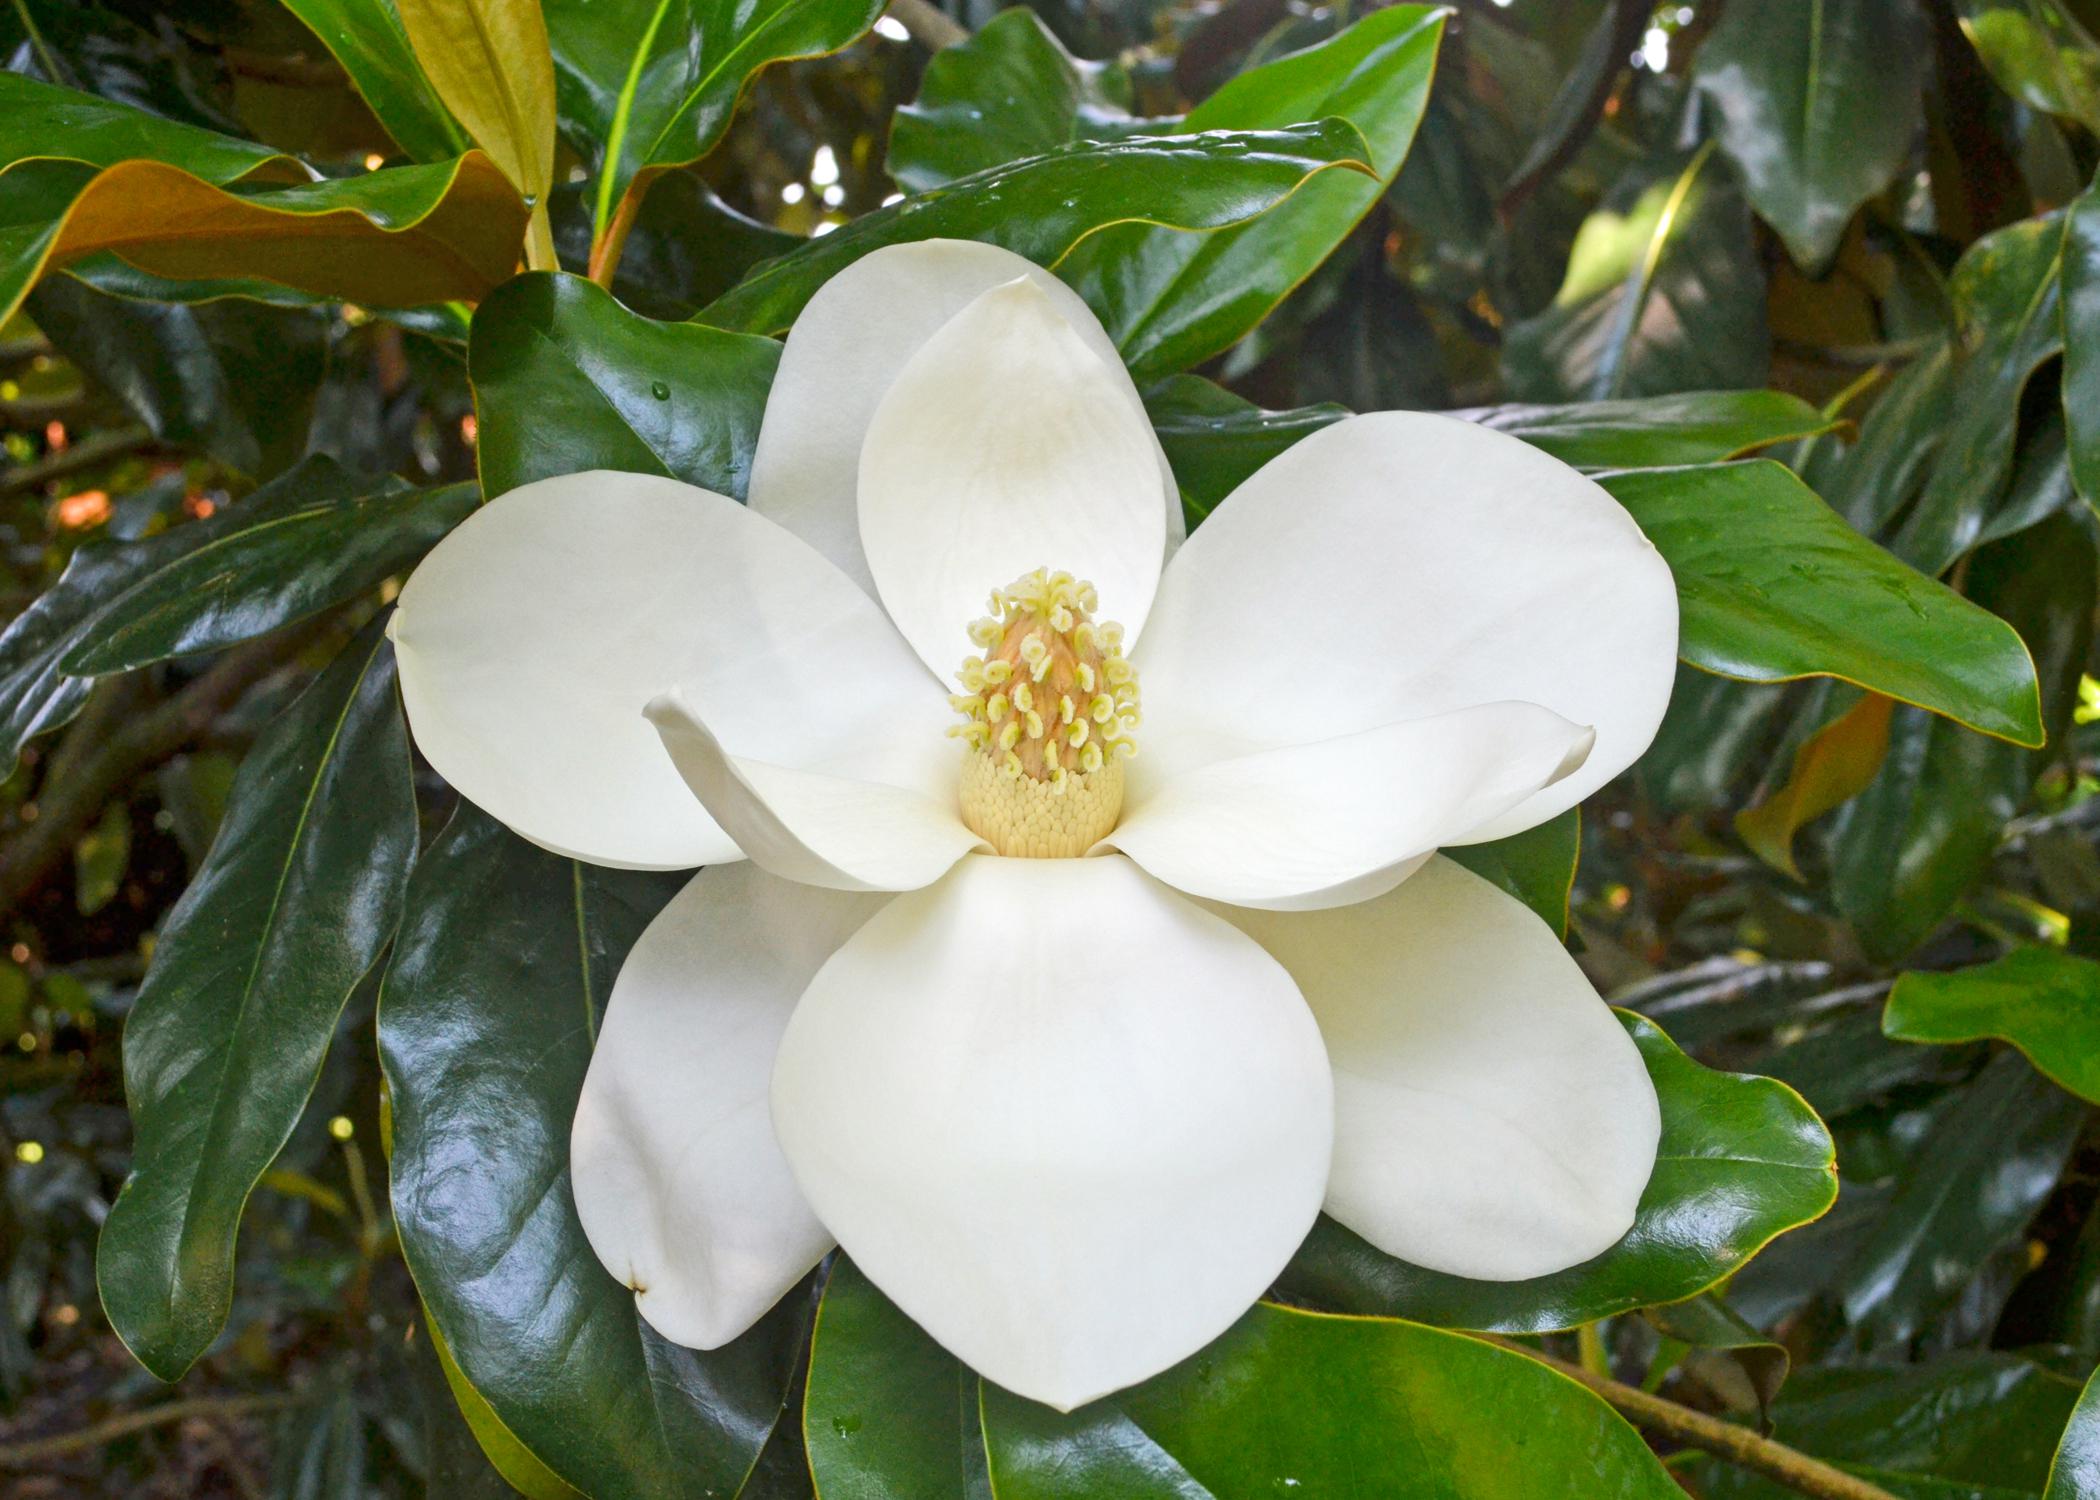 A large, creamy white bloom has a woody, yellow center cone.